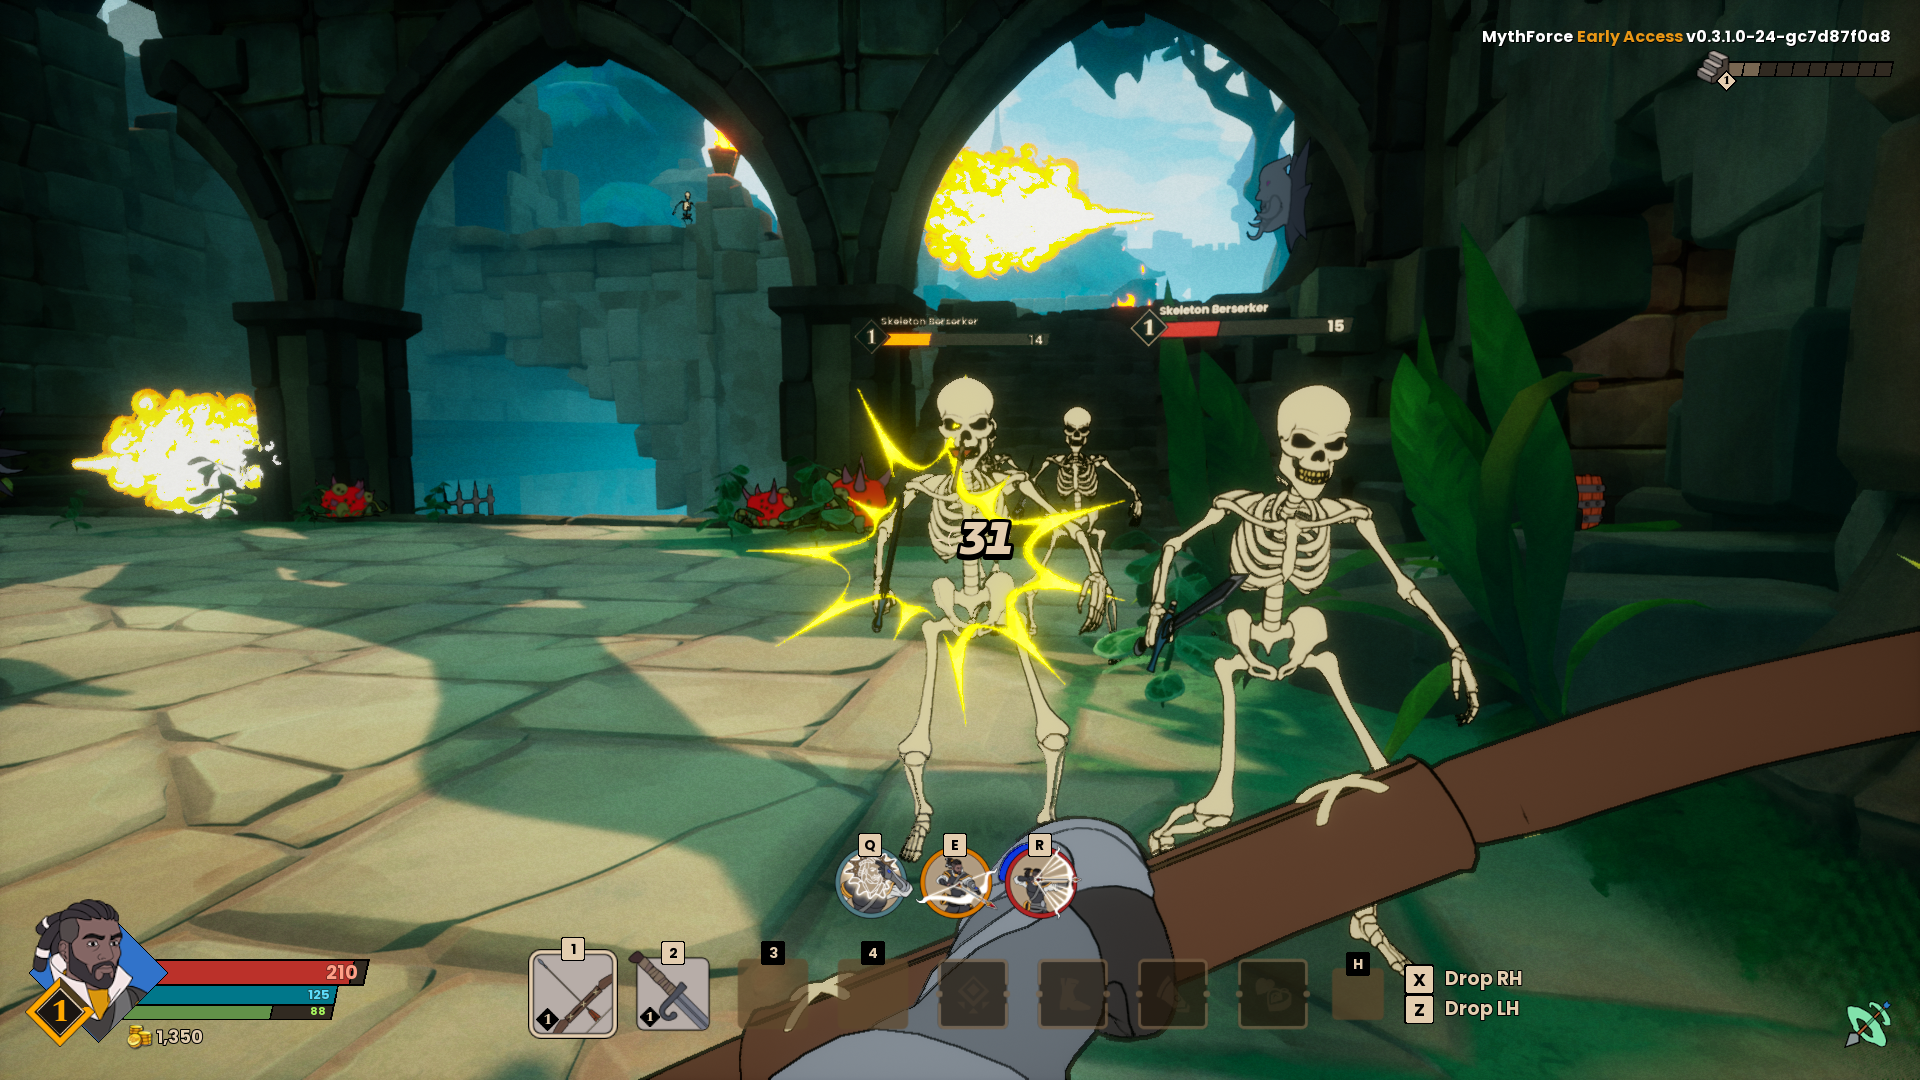 MythForce preview - in first-person, the player fires an arrow at one of two oncoming skeletons, with yellow comic-style sparks and damage numbers popping out.